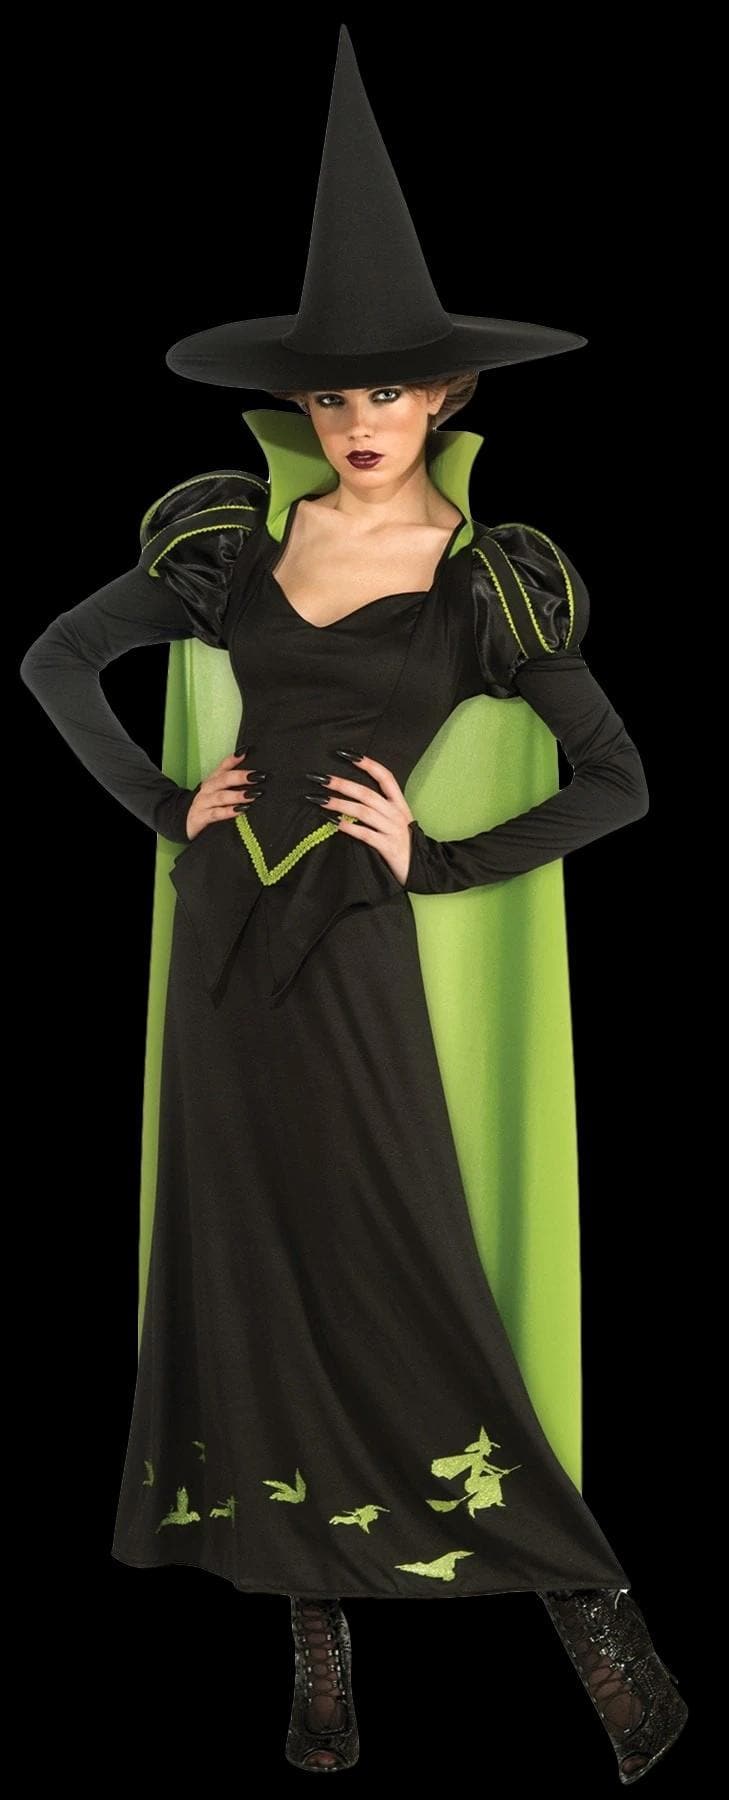 "Wicked Witch of the West" Women's Halloween Costume - Adult